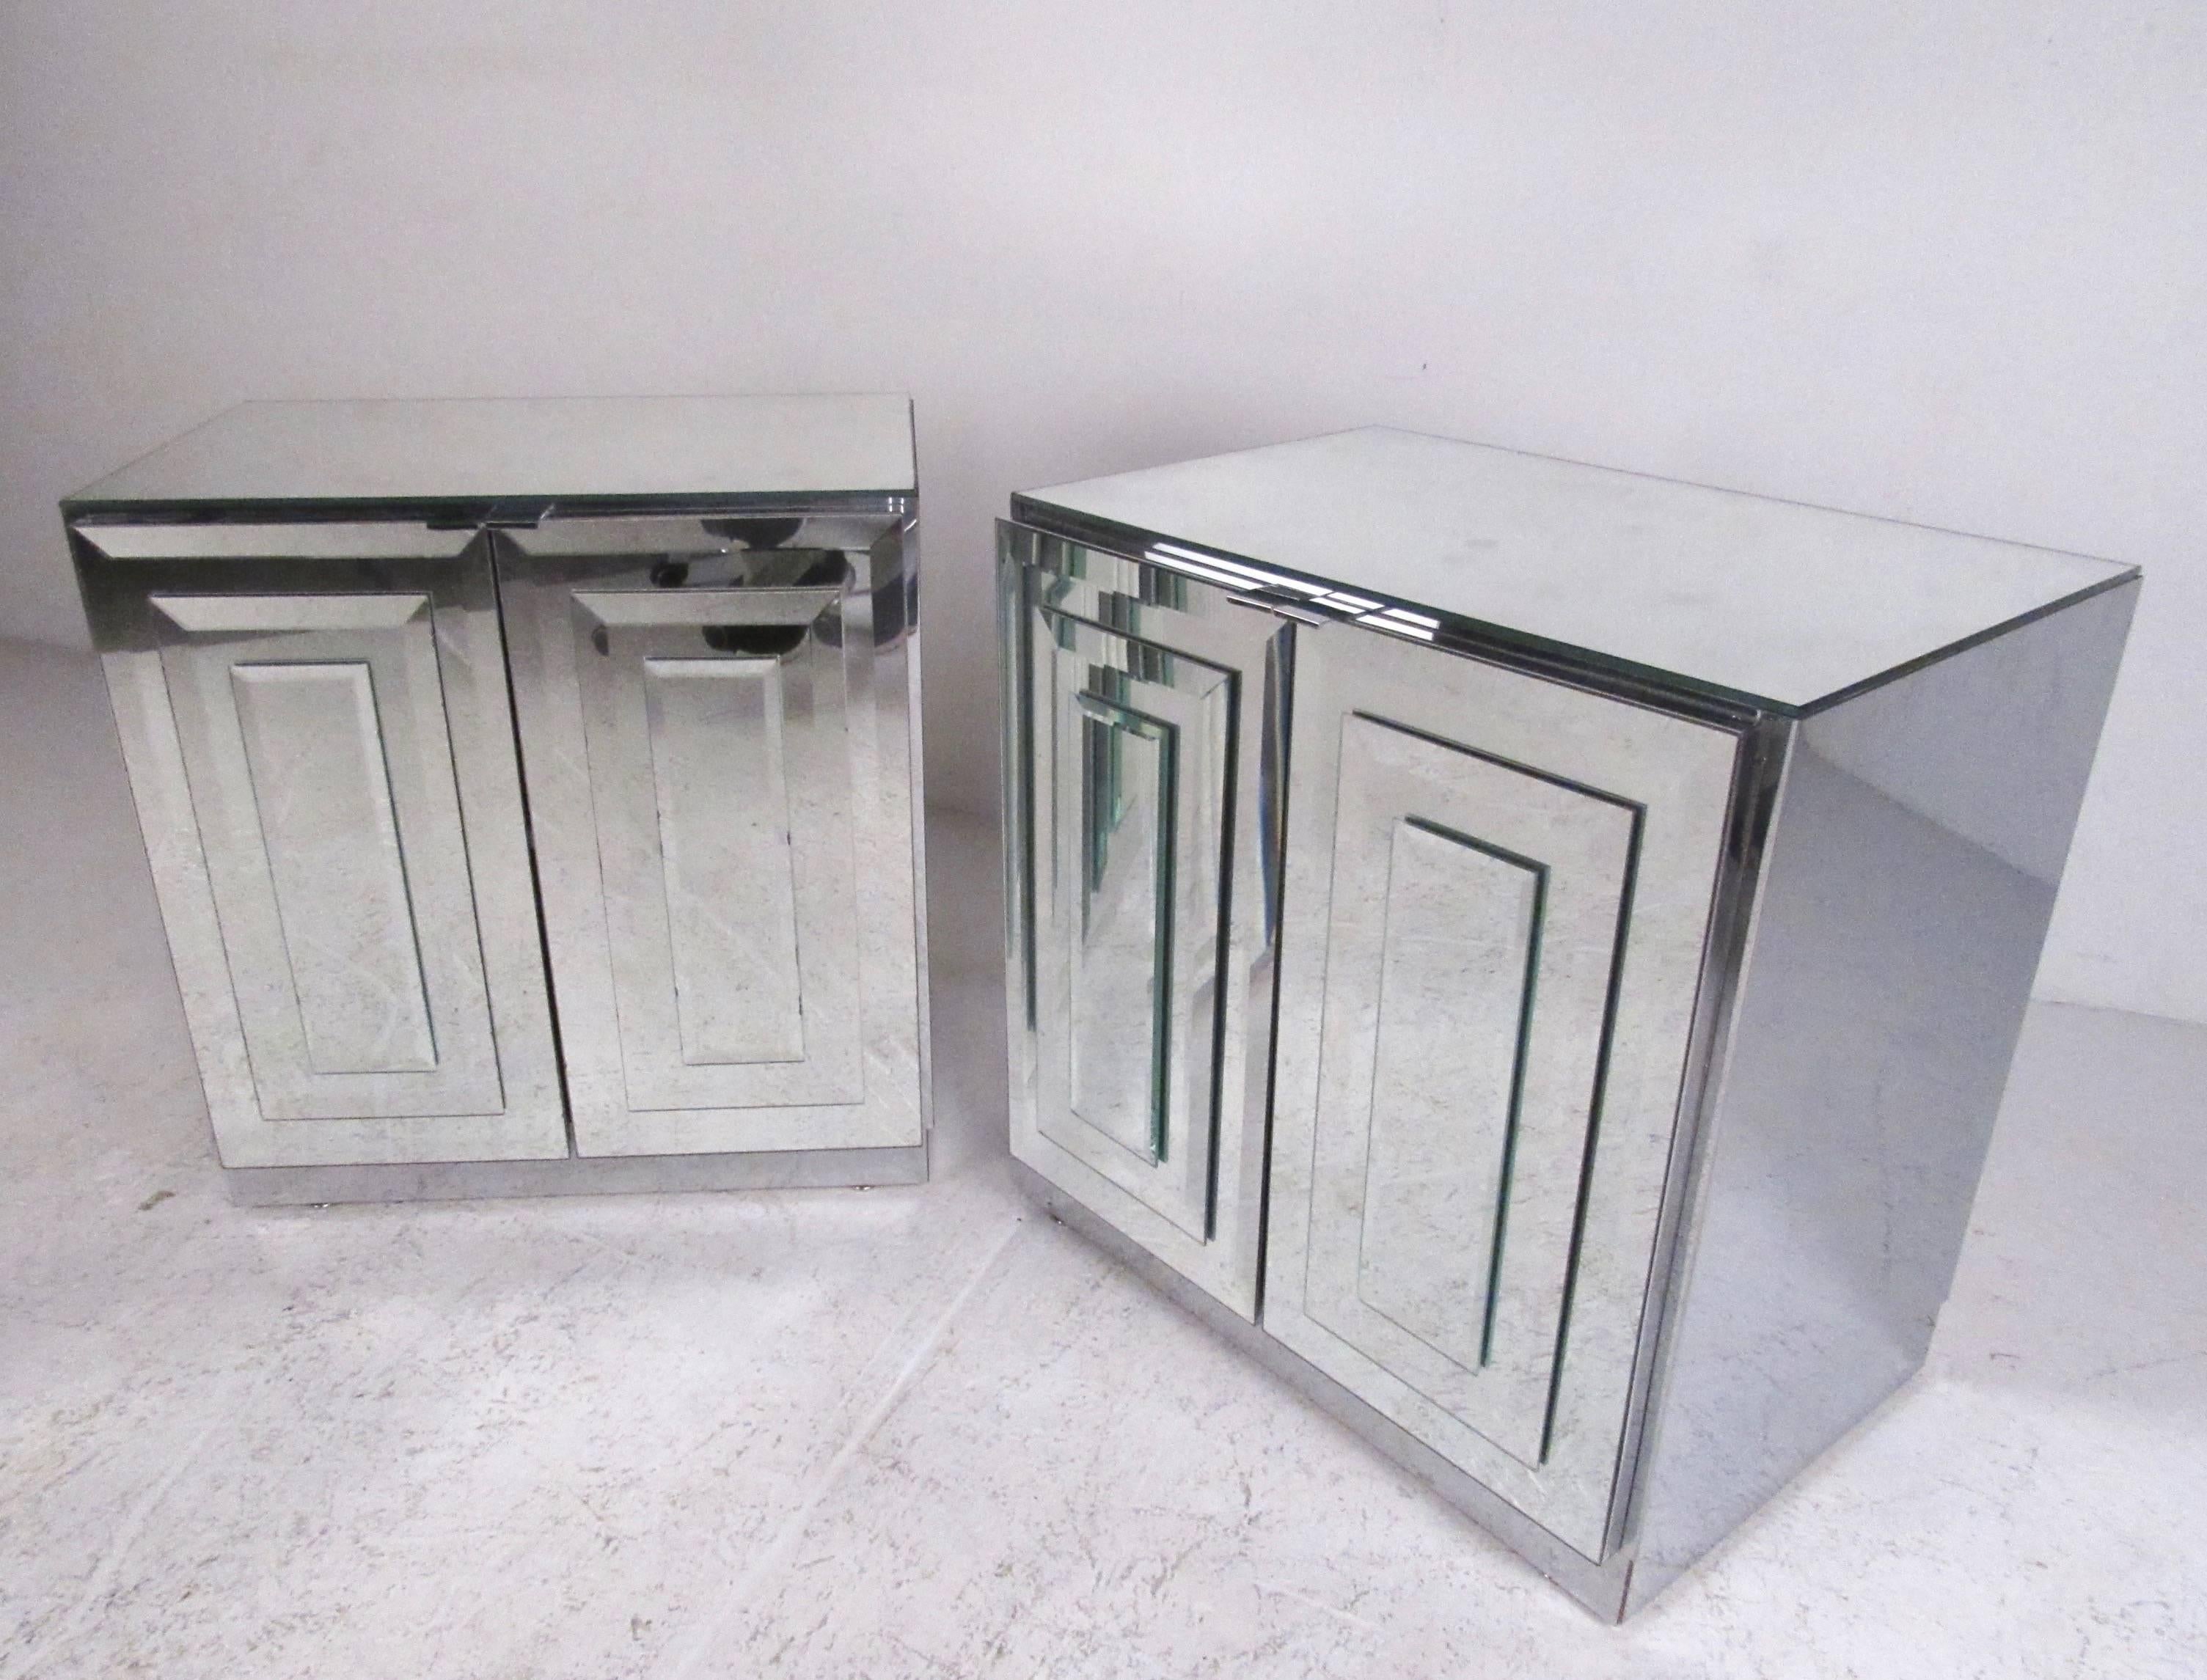 This stylish pair of Mid-Century Modern end tables by Ello Furniture features elegant mirrored finish, with sculptural glass fronts and sides. Interior cabinet space offers adjustable shelf storage ideal for bedside or living room use. Please